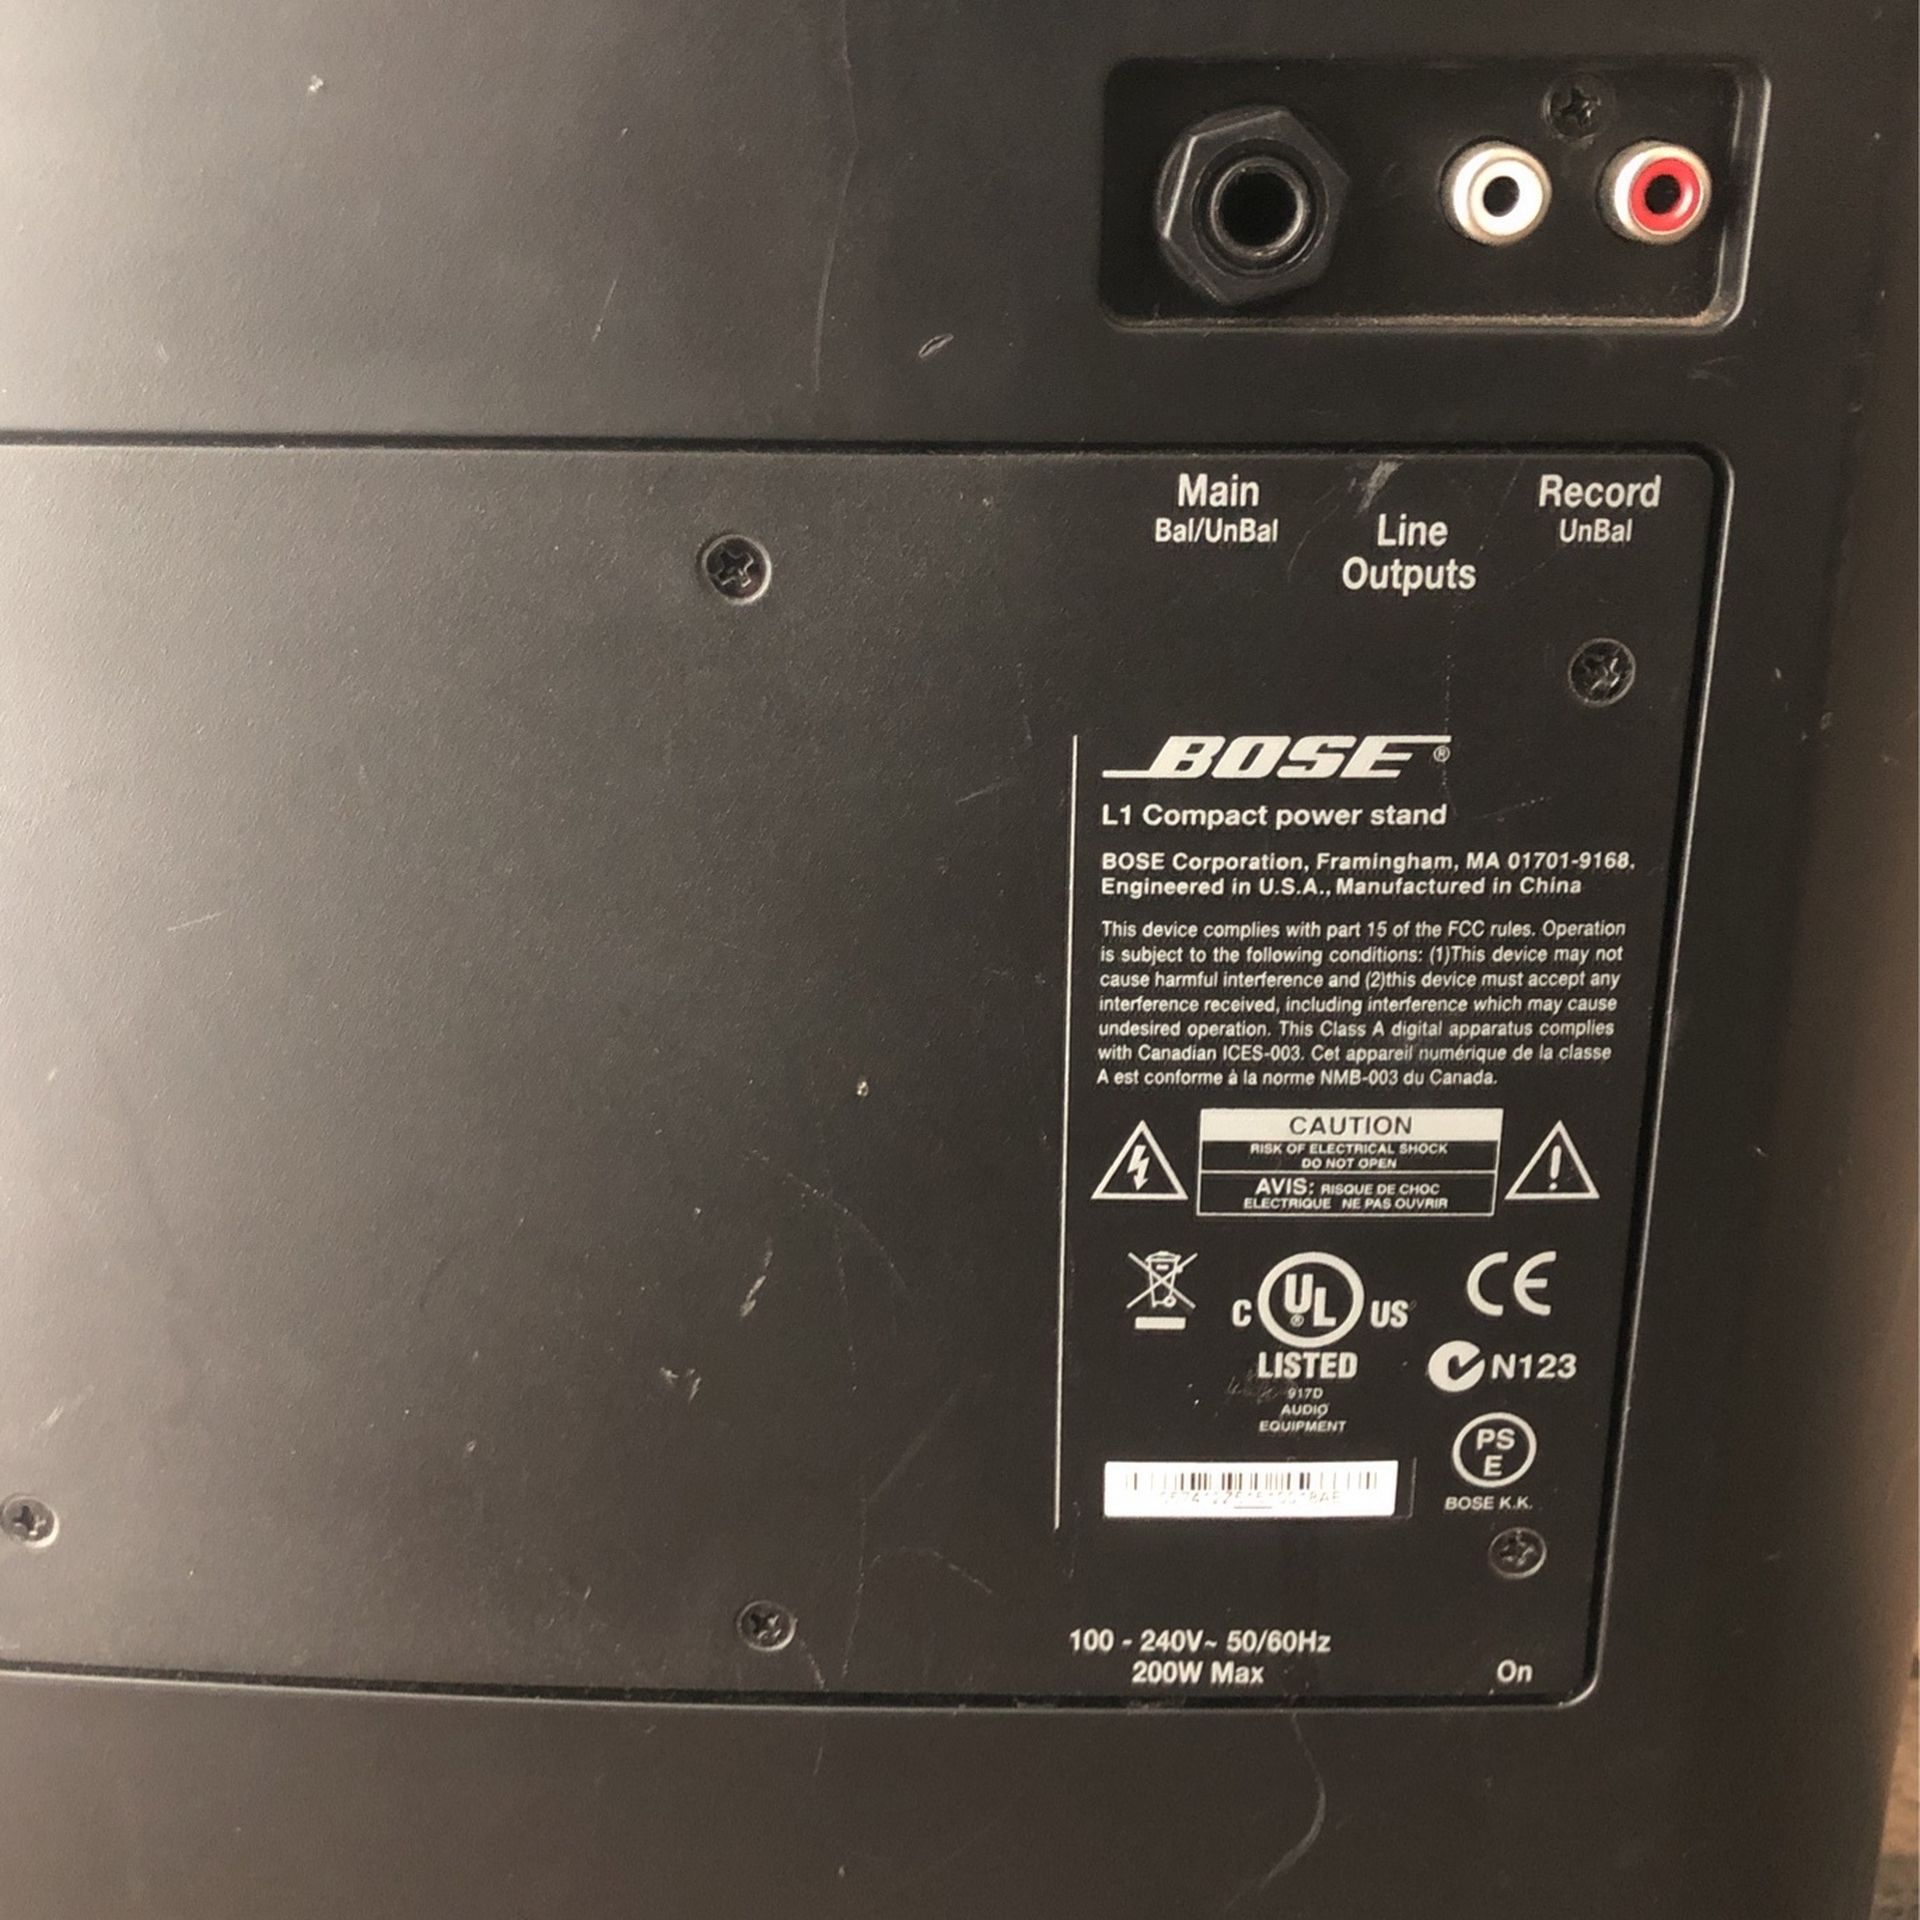 Bose L1 compact power stand